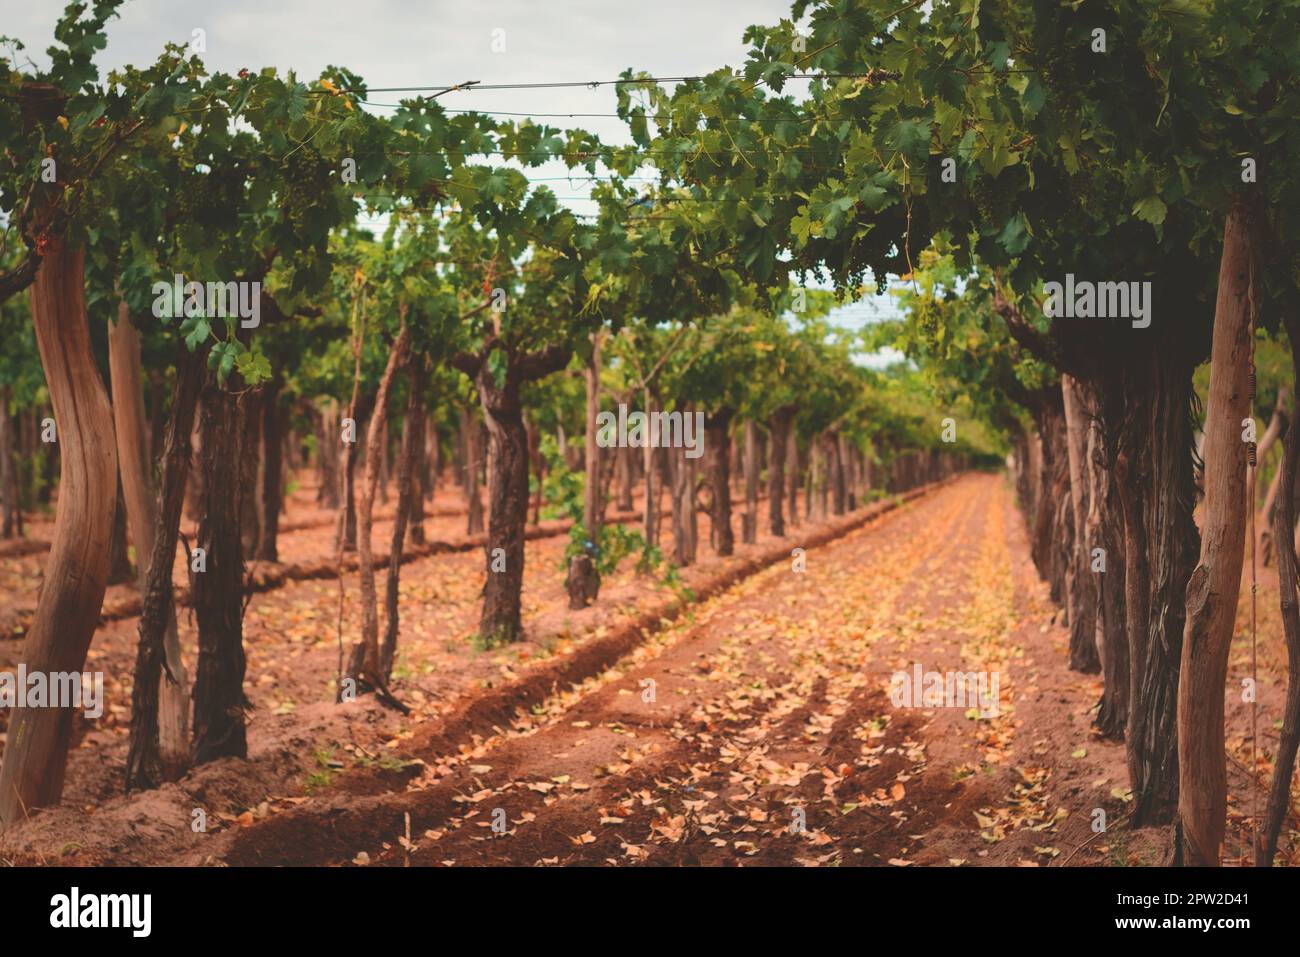 Grapevines on a vineyard estate in Mendoza, Argentina. Wine industry, agriculture background. Stock Photo